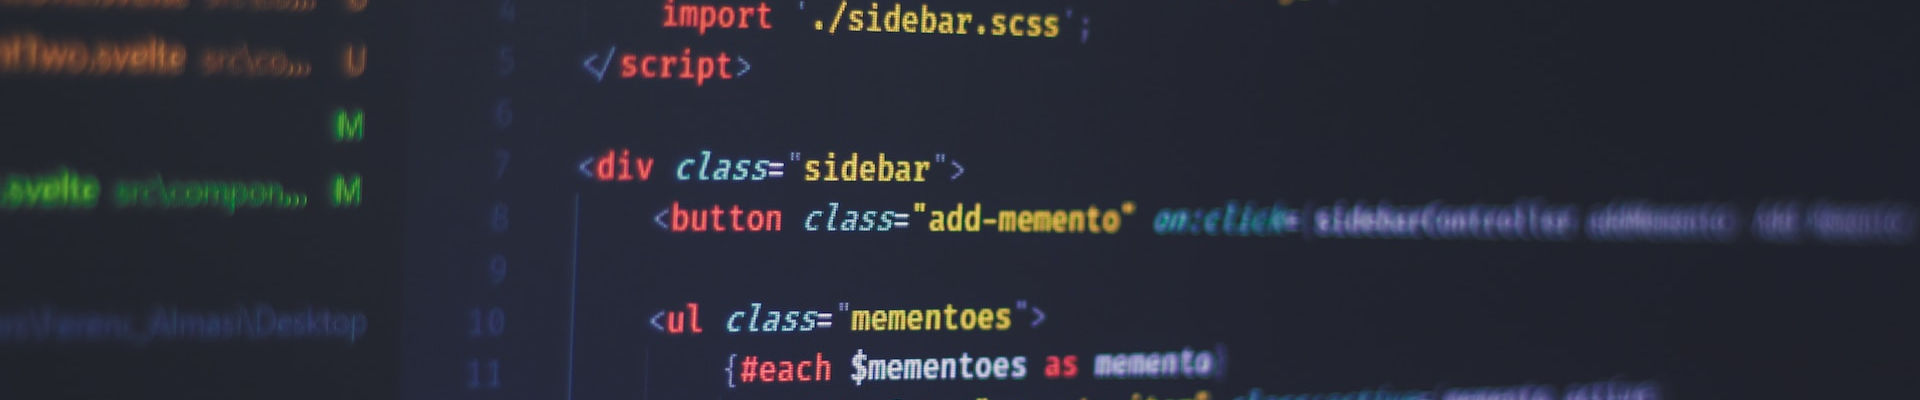 An image of a code editor displaying HTML code